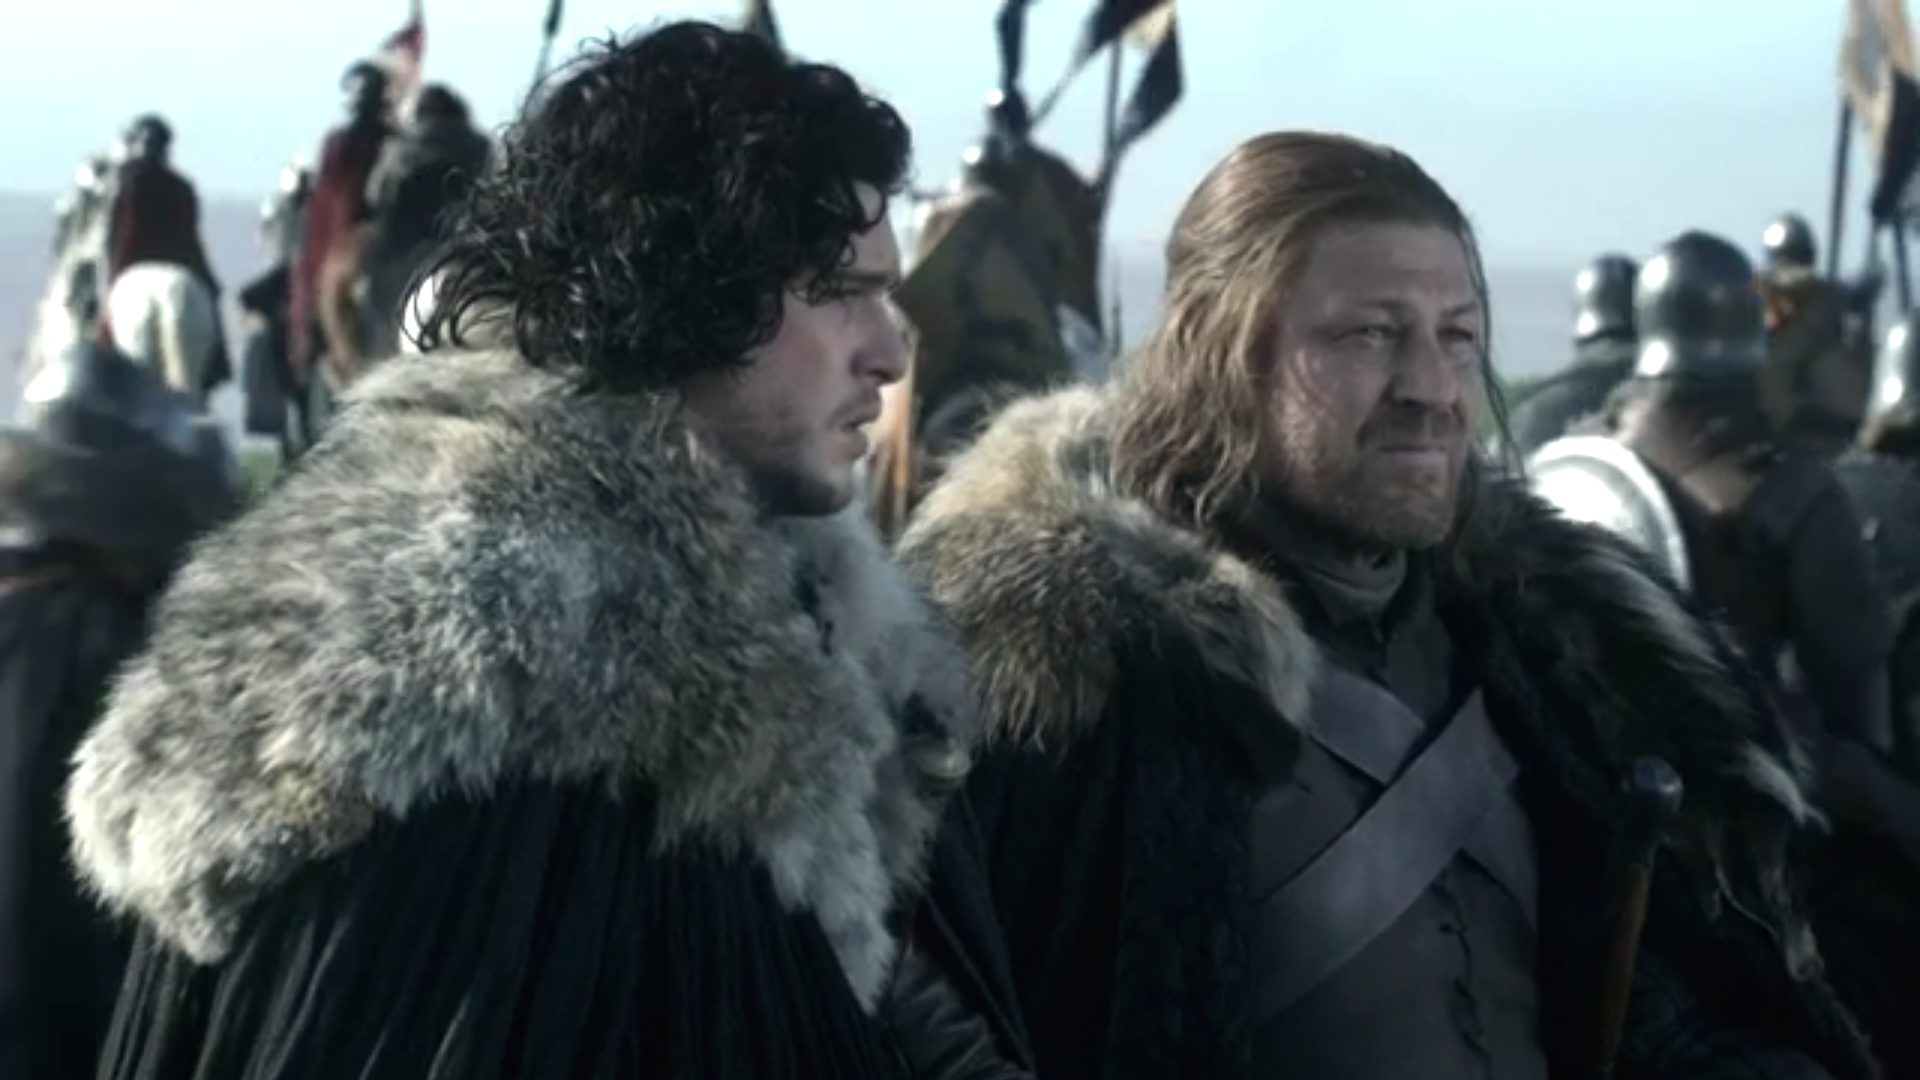 Game Of Thrones Is This Why Ned Stark Never Revealed The Truth About